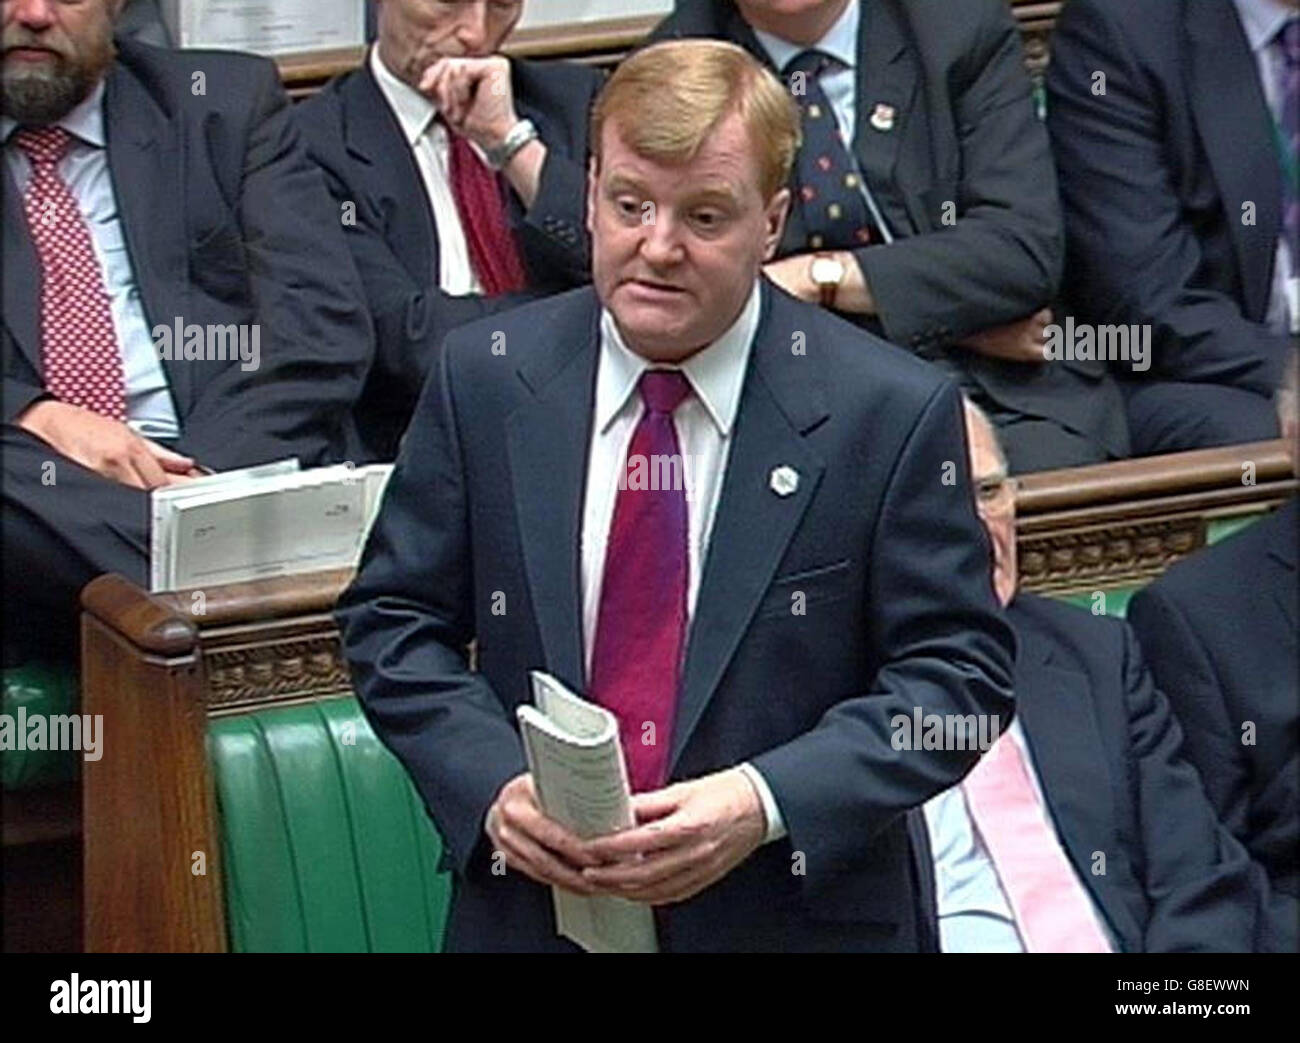 Prime Minister's Questions - House of Commons. Liberal Democrat Party leader Charles Kennedy. Stock Photo